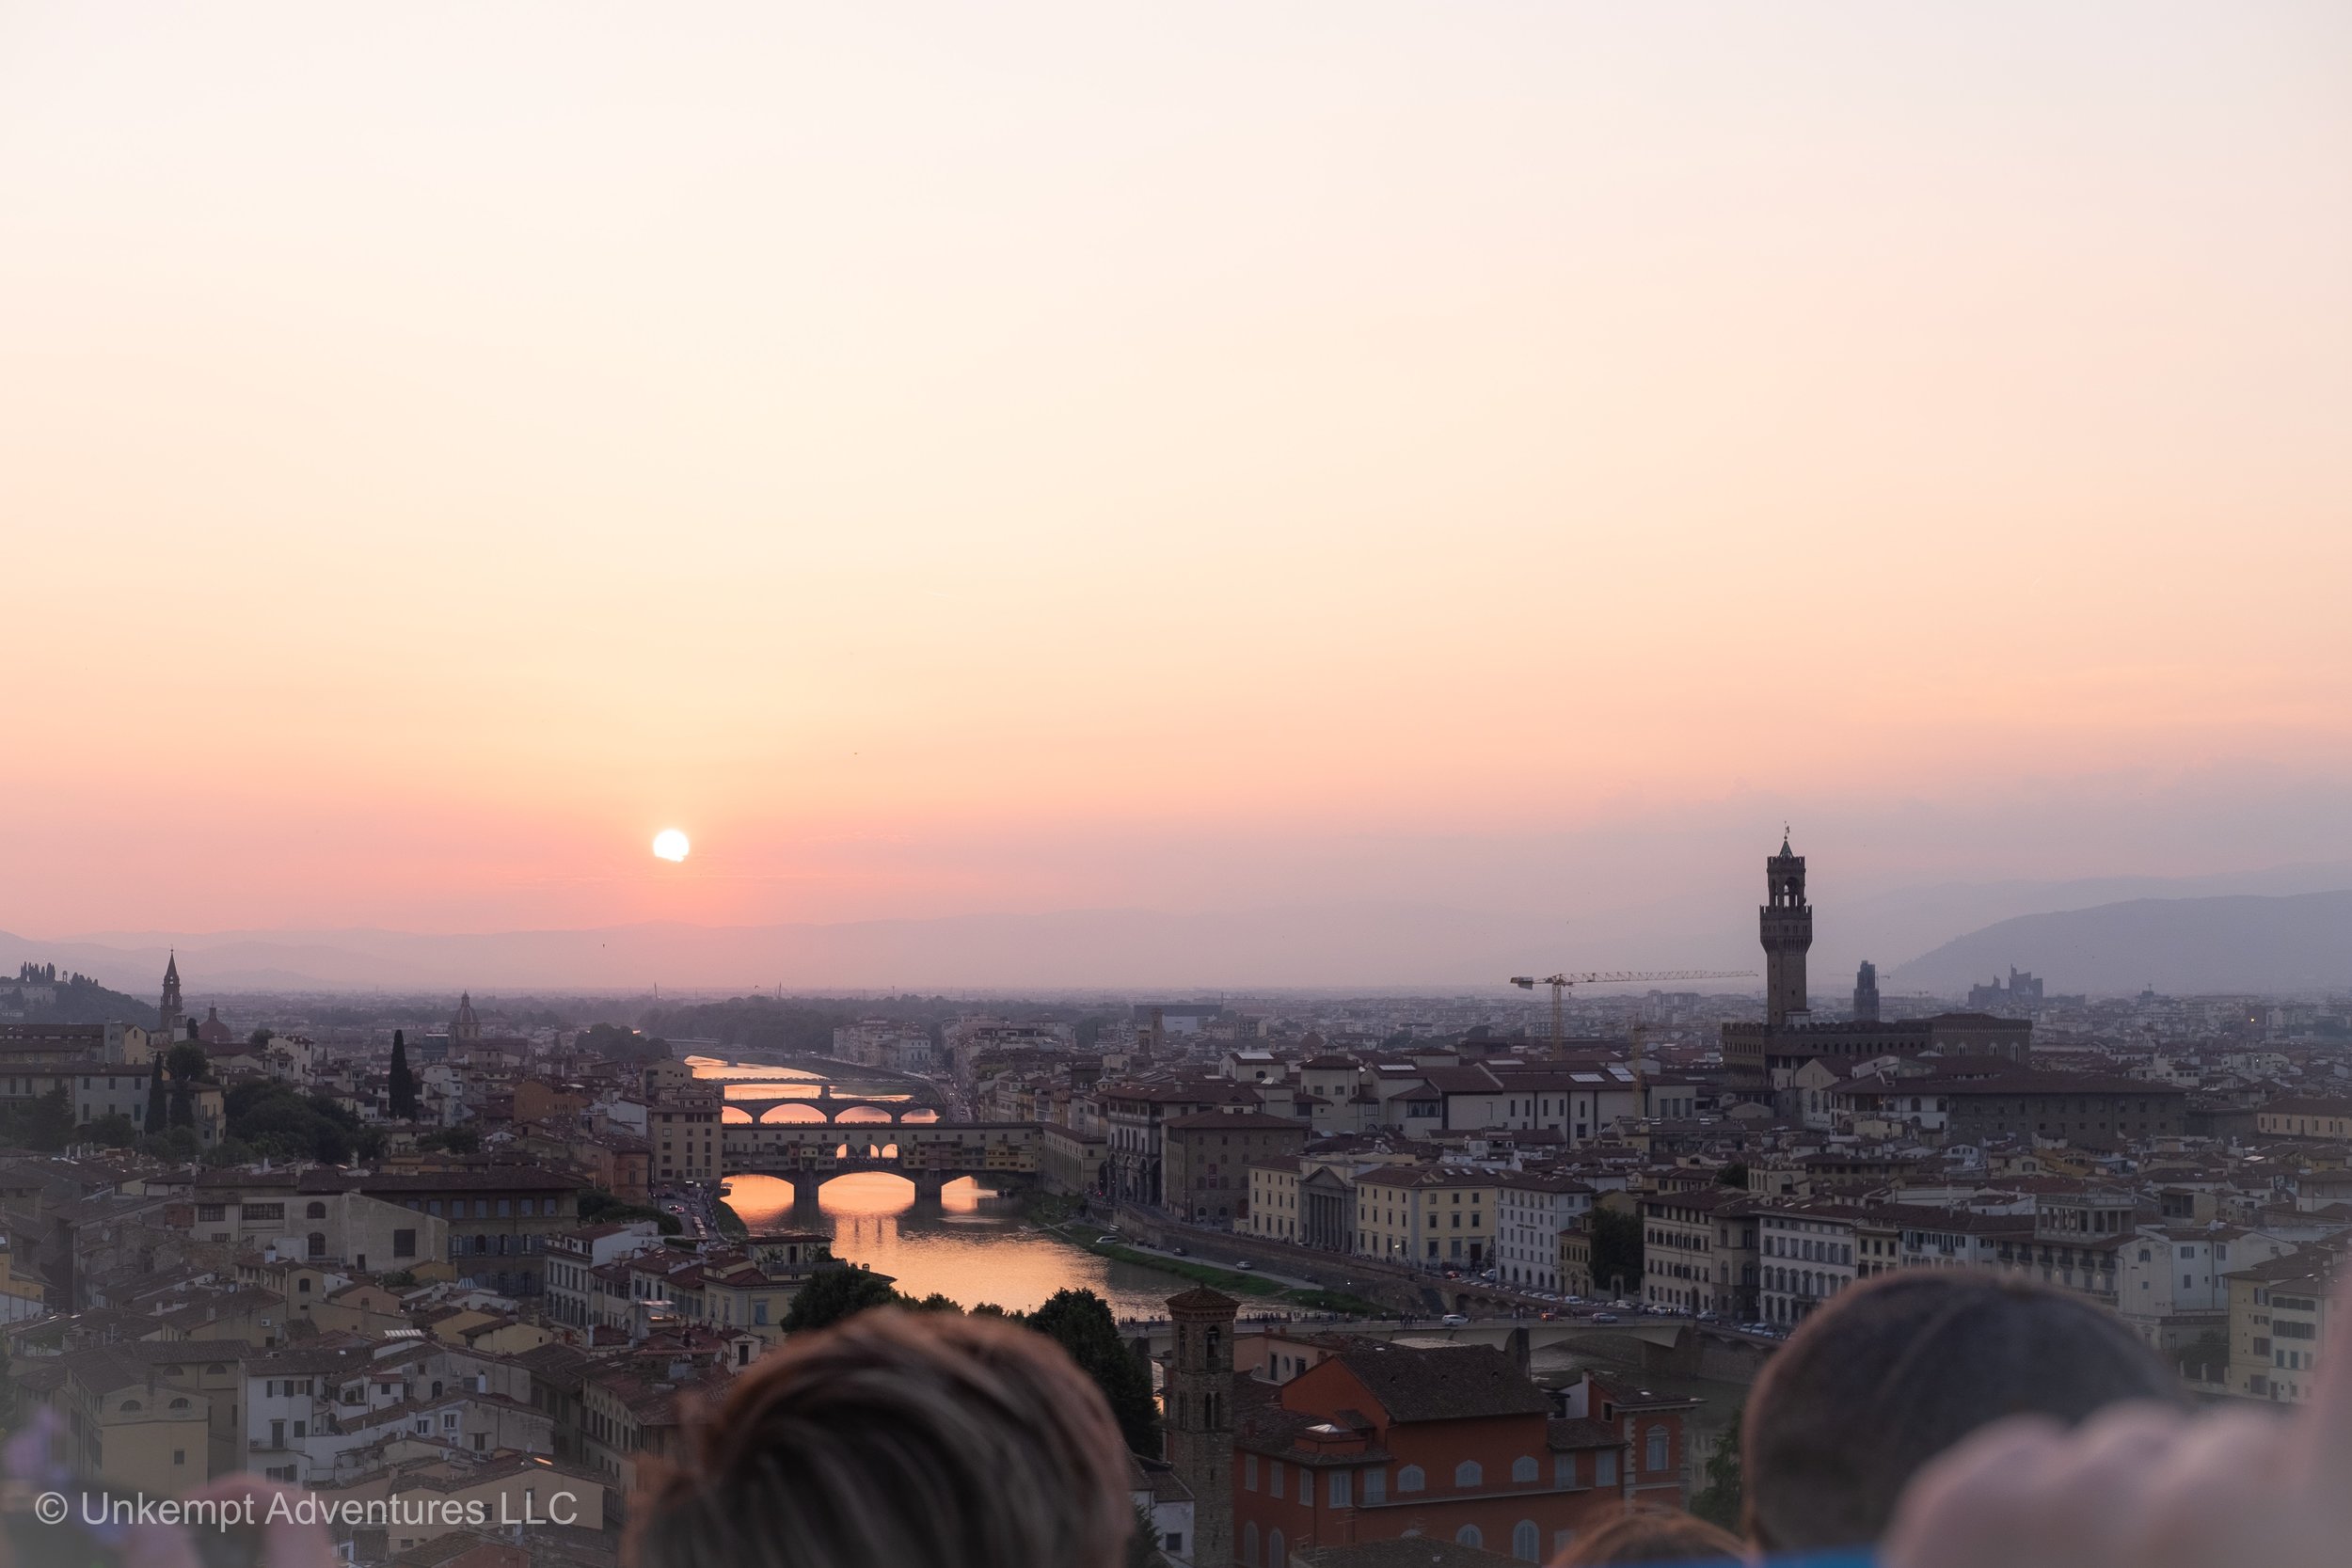 Sunset Picnic at the Piazza Michelangelo in Florence, Italy